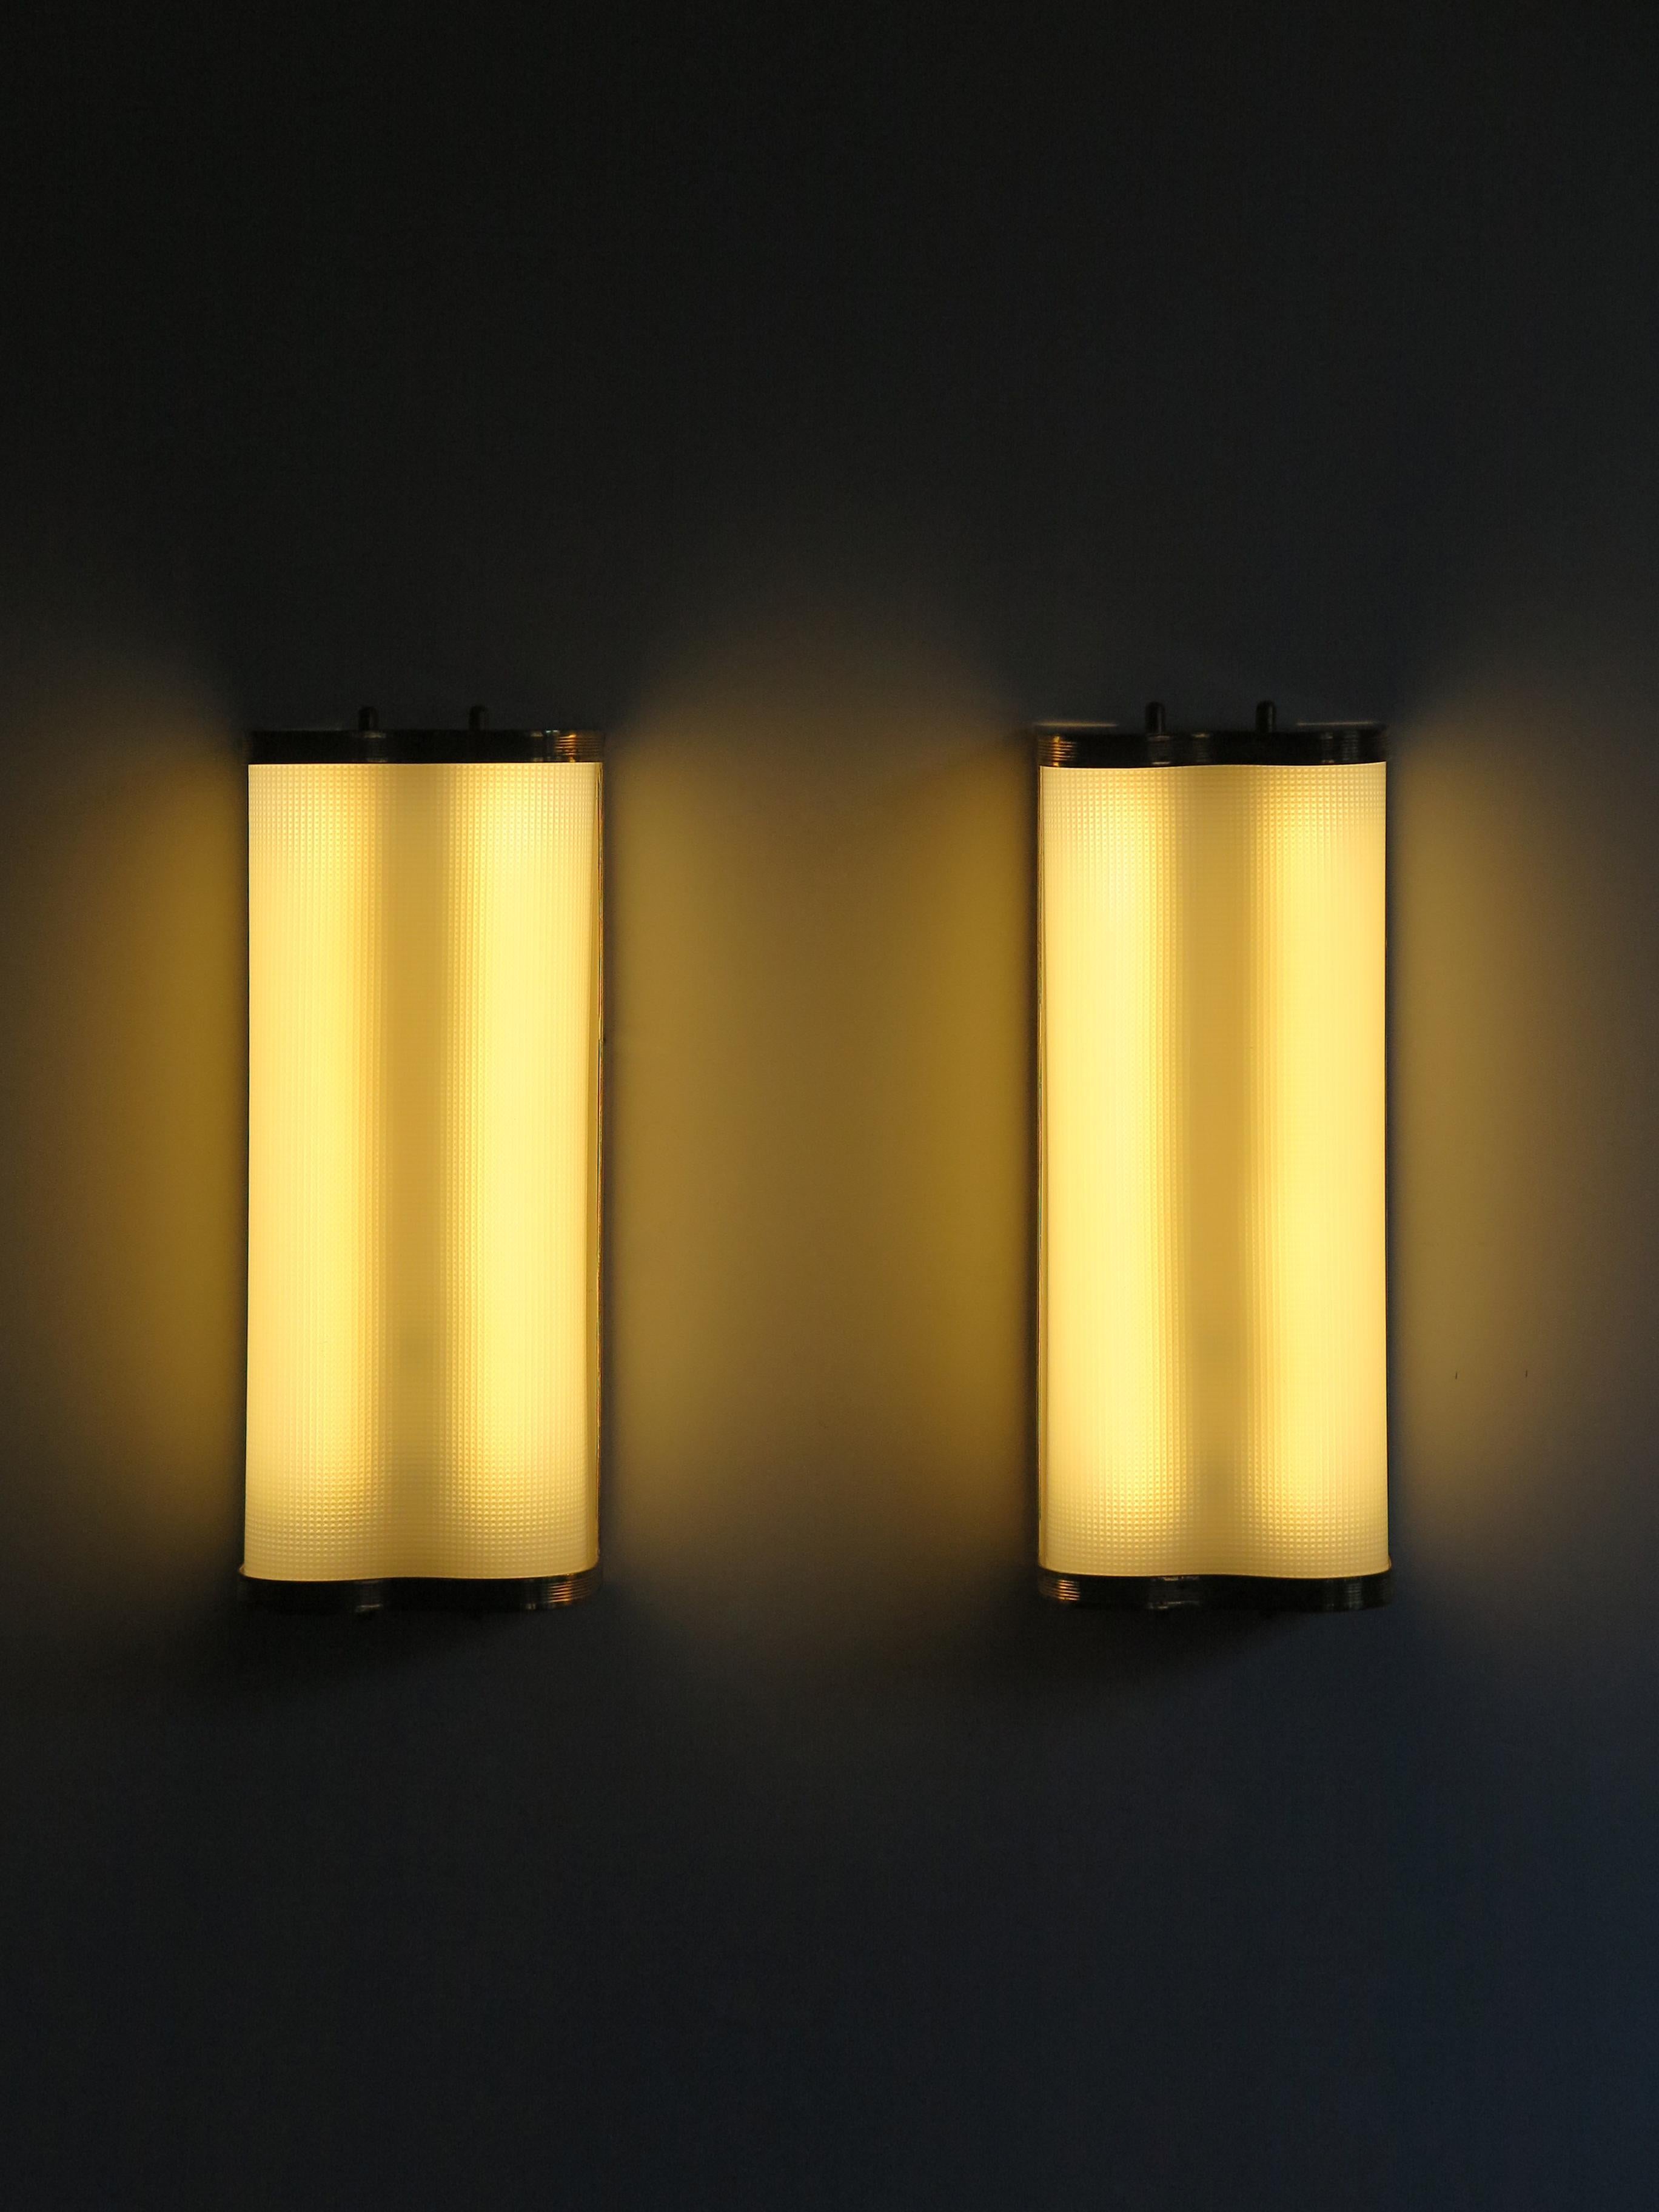 Midcentury modern design sconces wall lamps with brass structure and curved plexiglass diffuser, 1950s Italian production.
New electrical system with LED lights. 

Please note that the lamps are original of the period and this shows normal signs